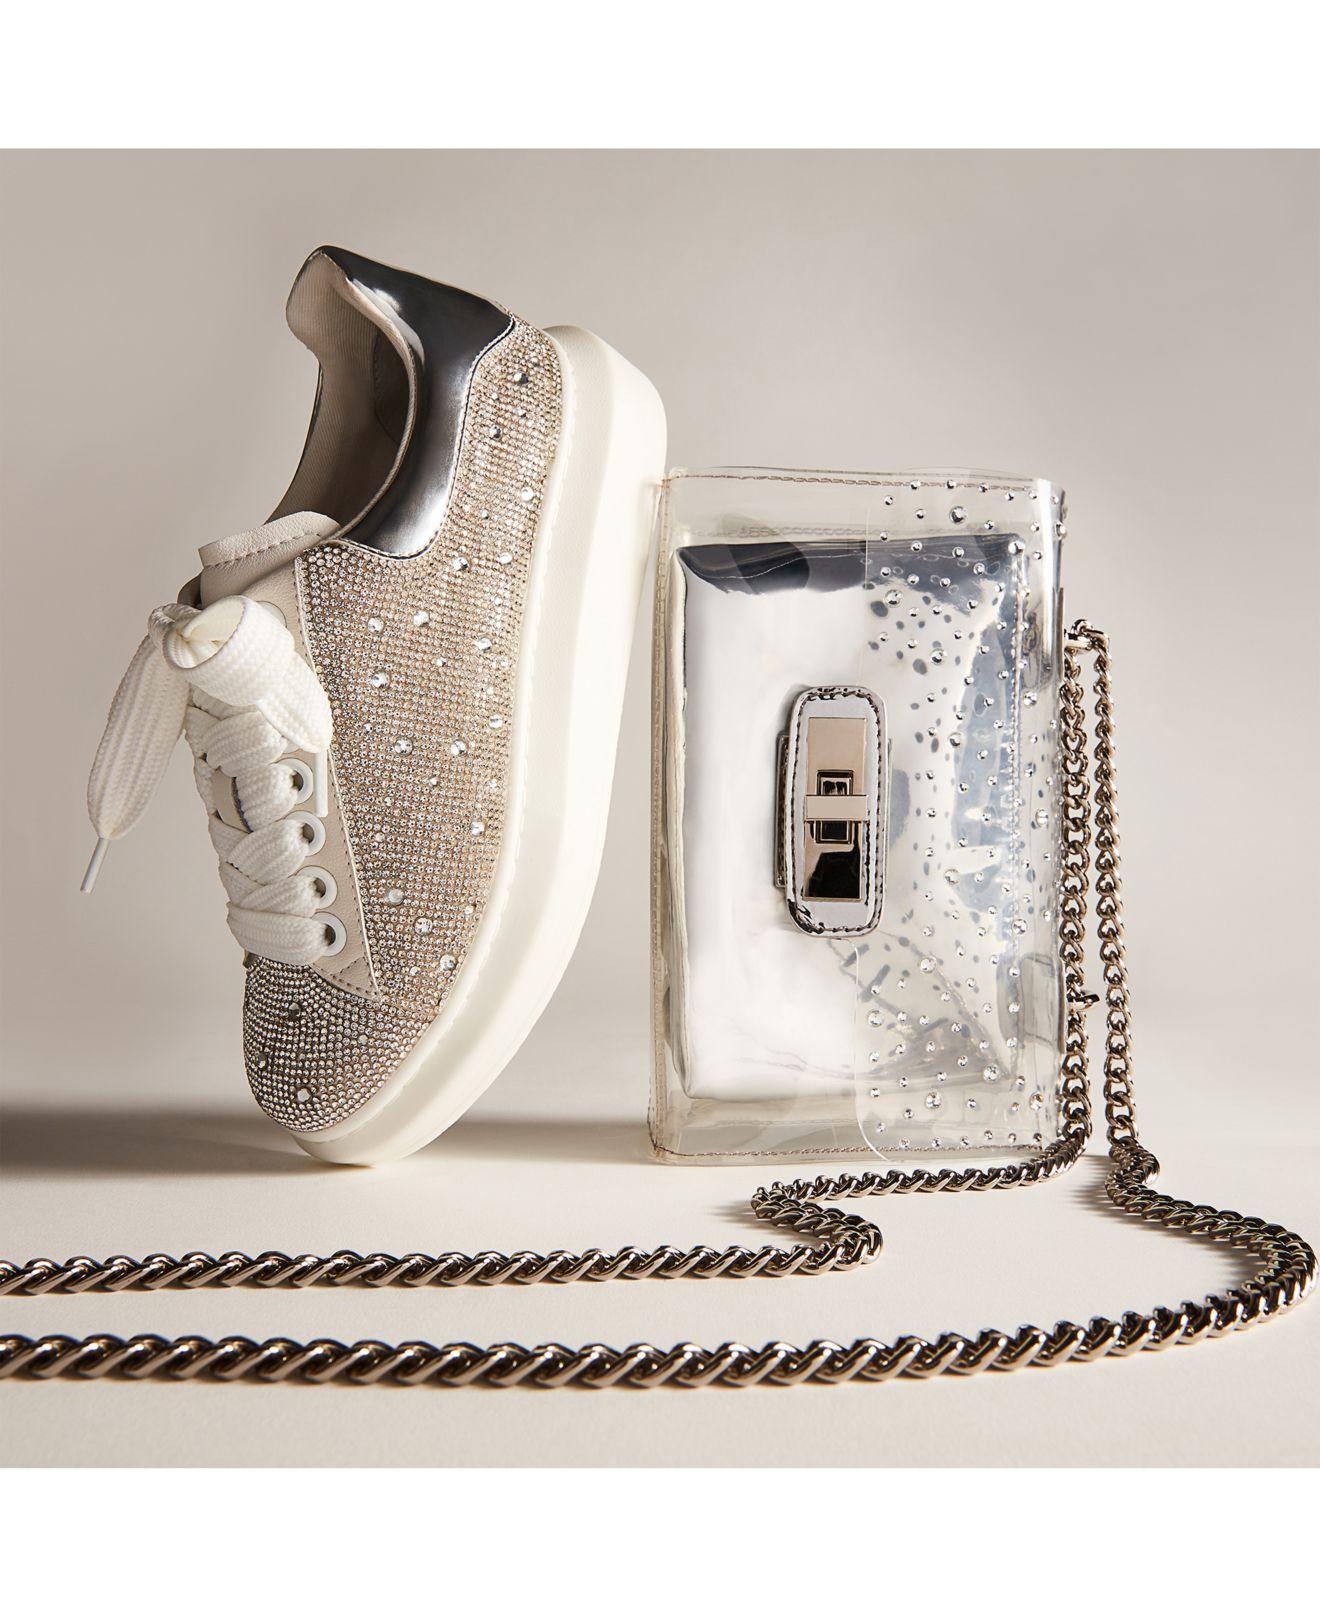 Steve Madden Glimmer-r Flatform Lace-up Sneakers in Crystal Rhinestone  (White) - Lyst